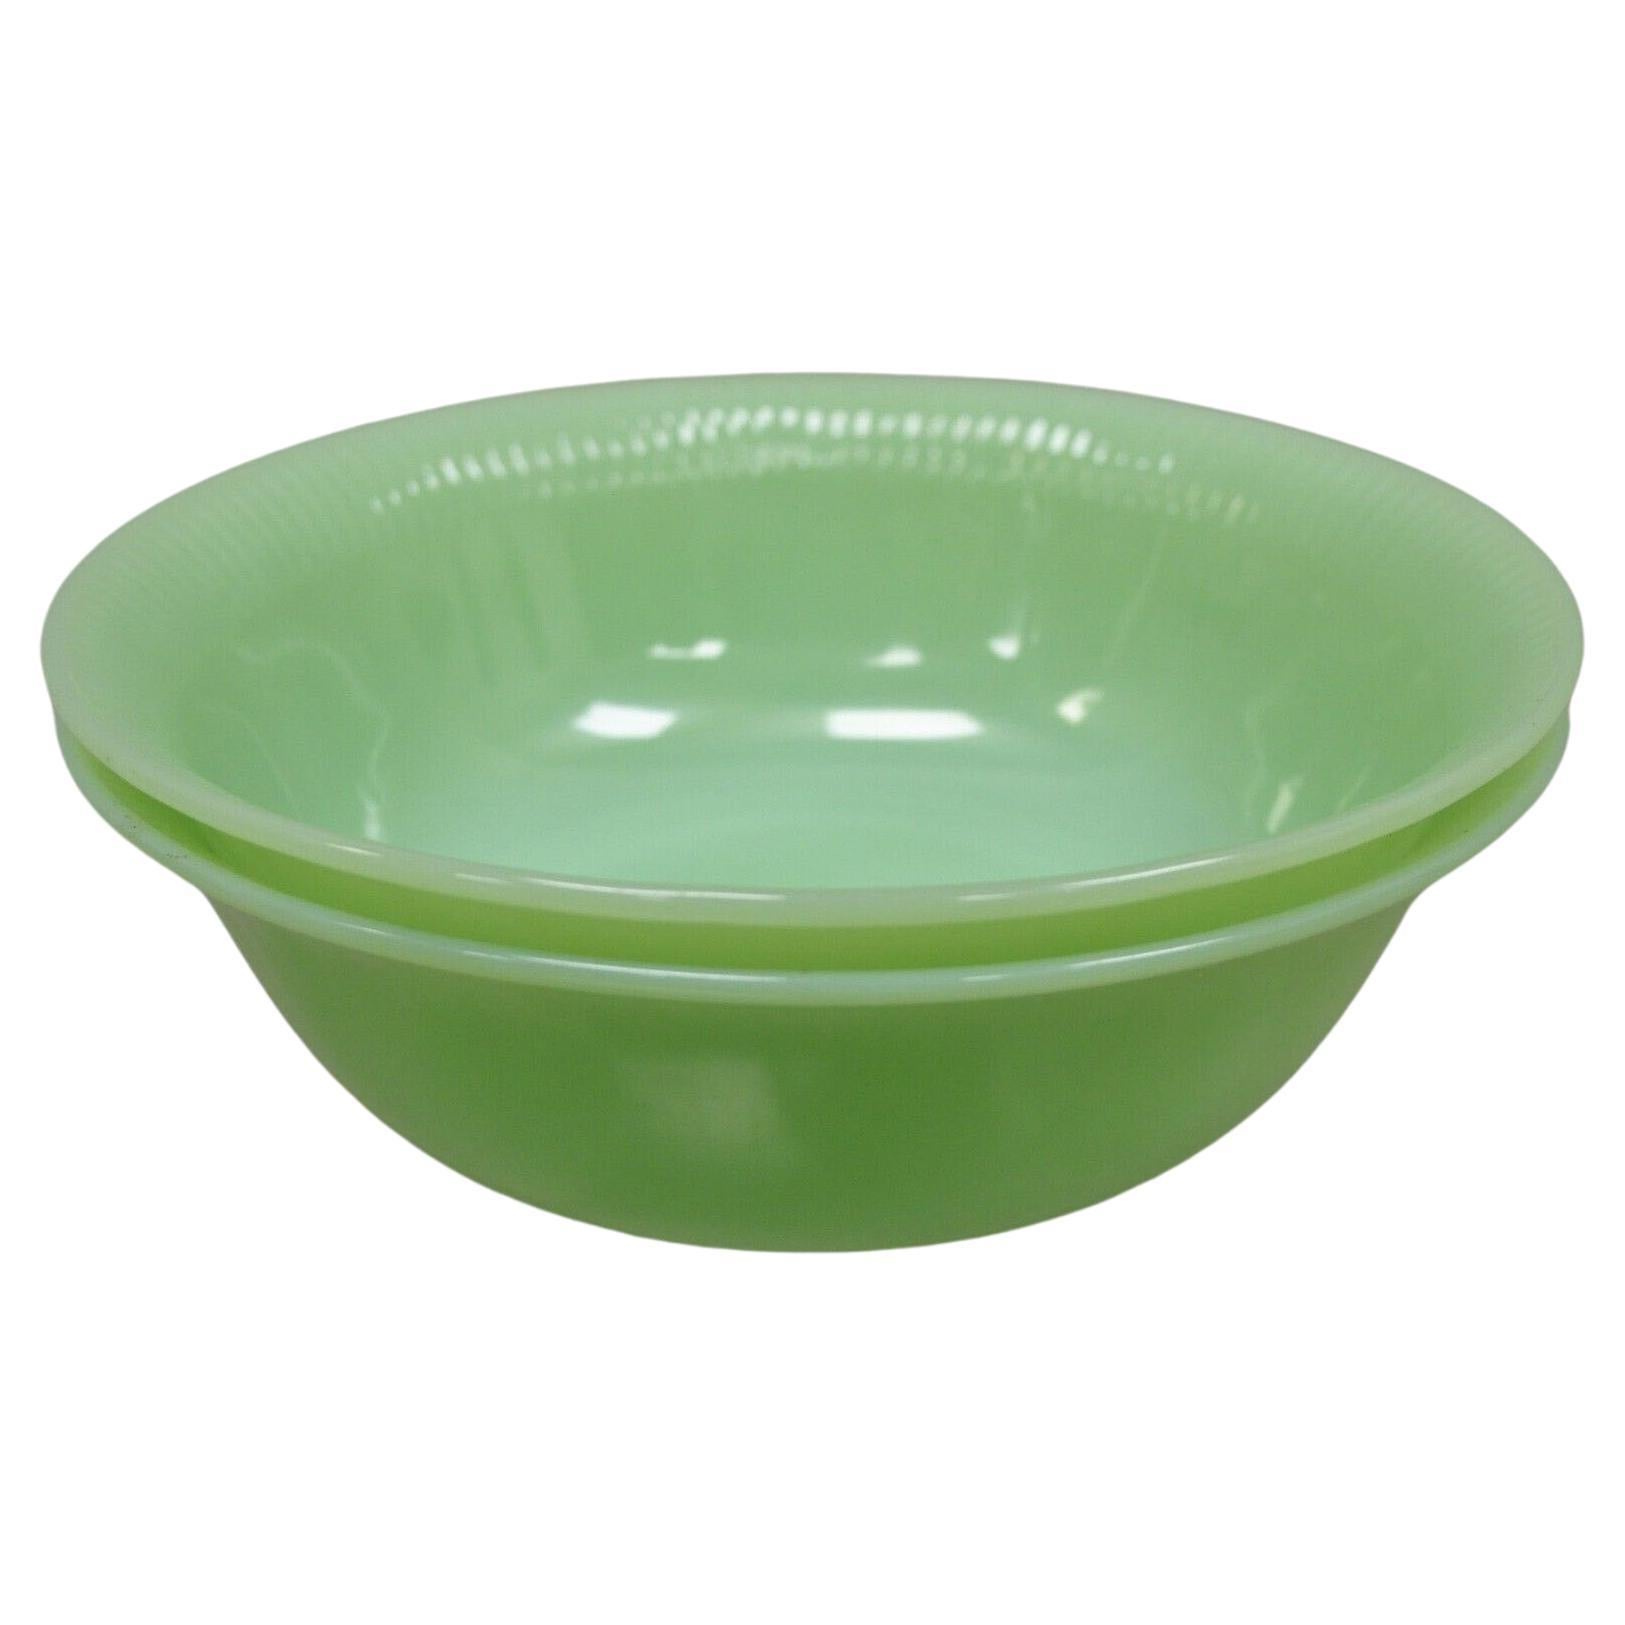 Vtg Fire King Oven Ware Green Jadeite Ribbed Jane Ray 8.25" Serving Bowl - 2 Pcs For Sale